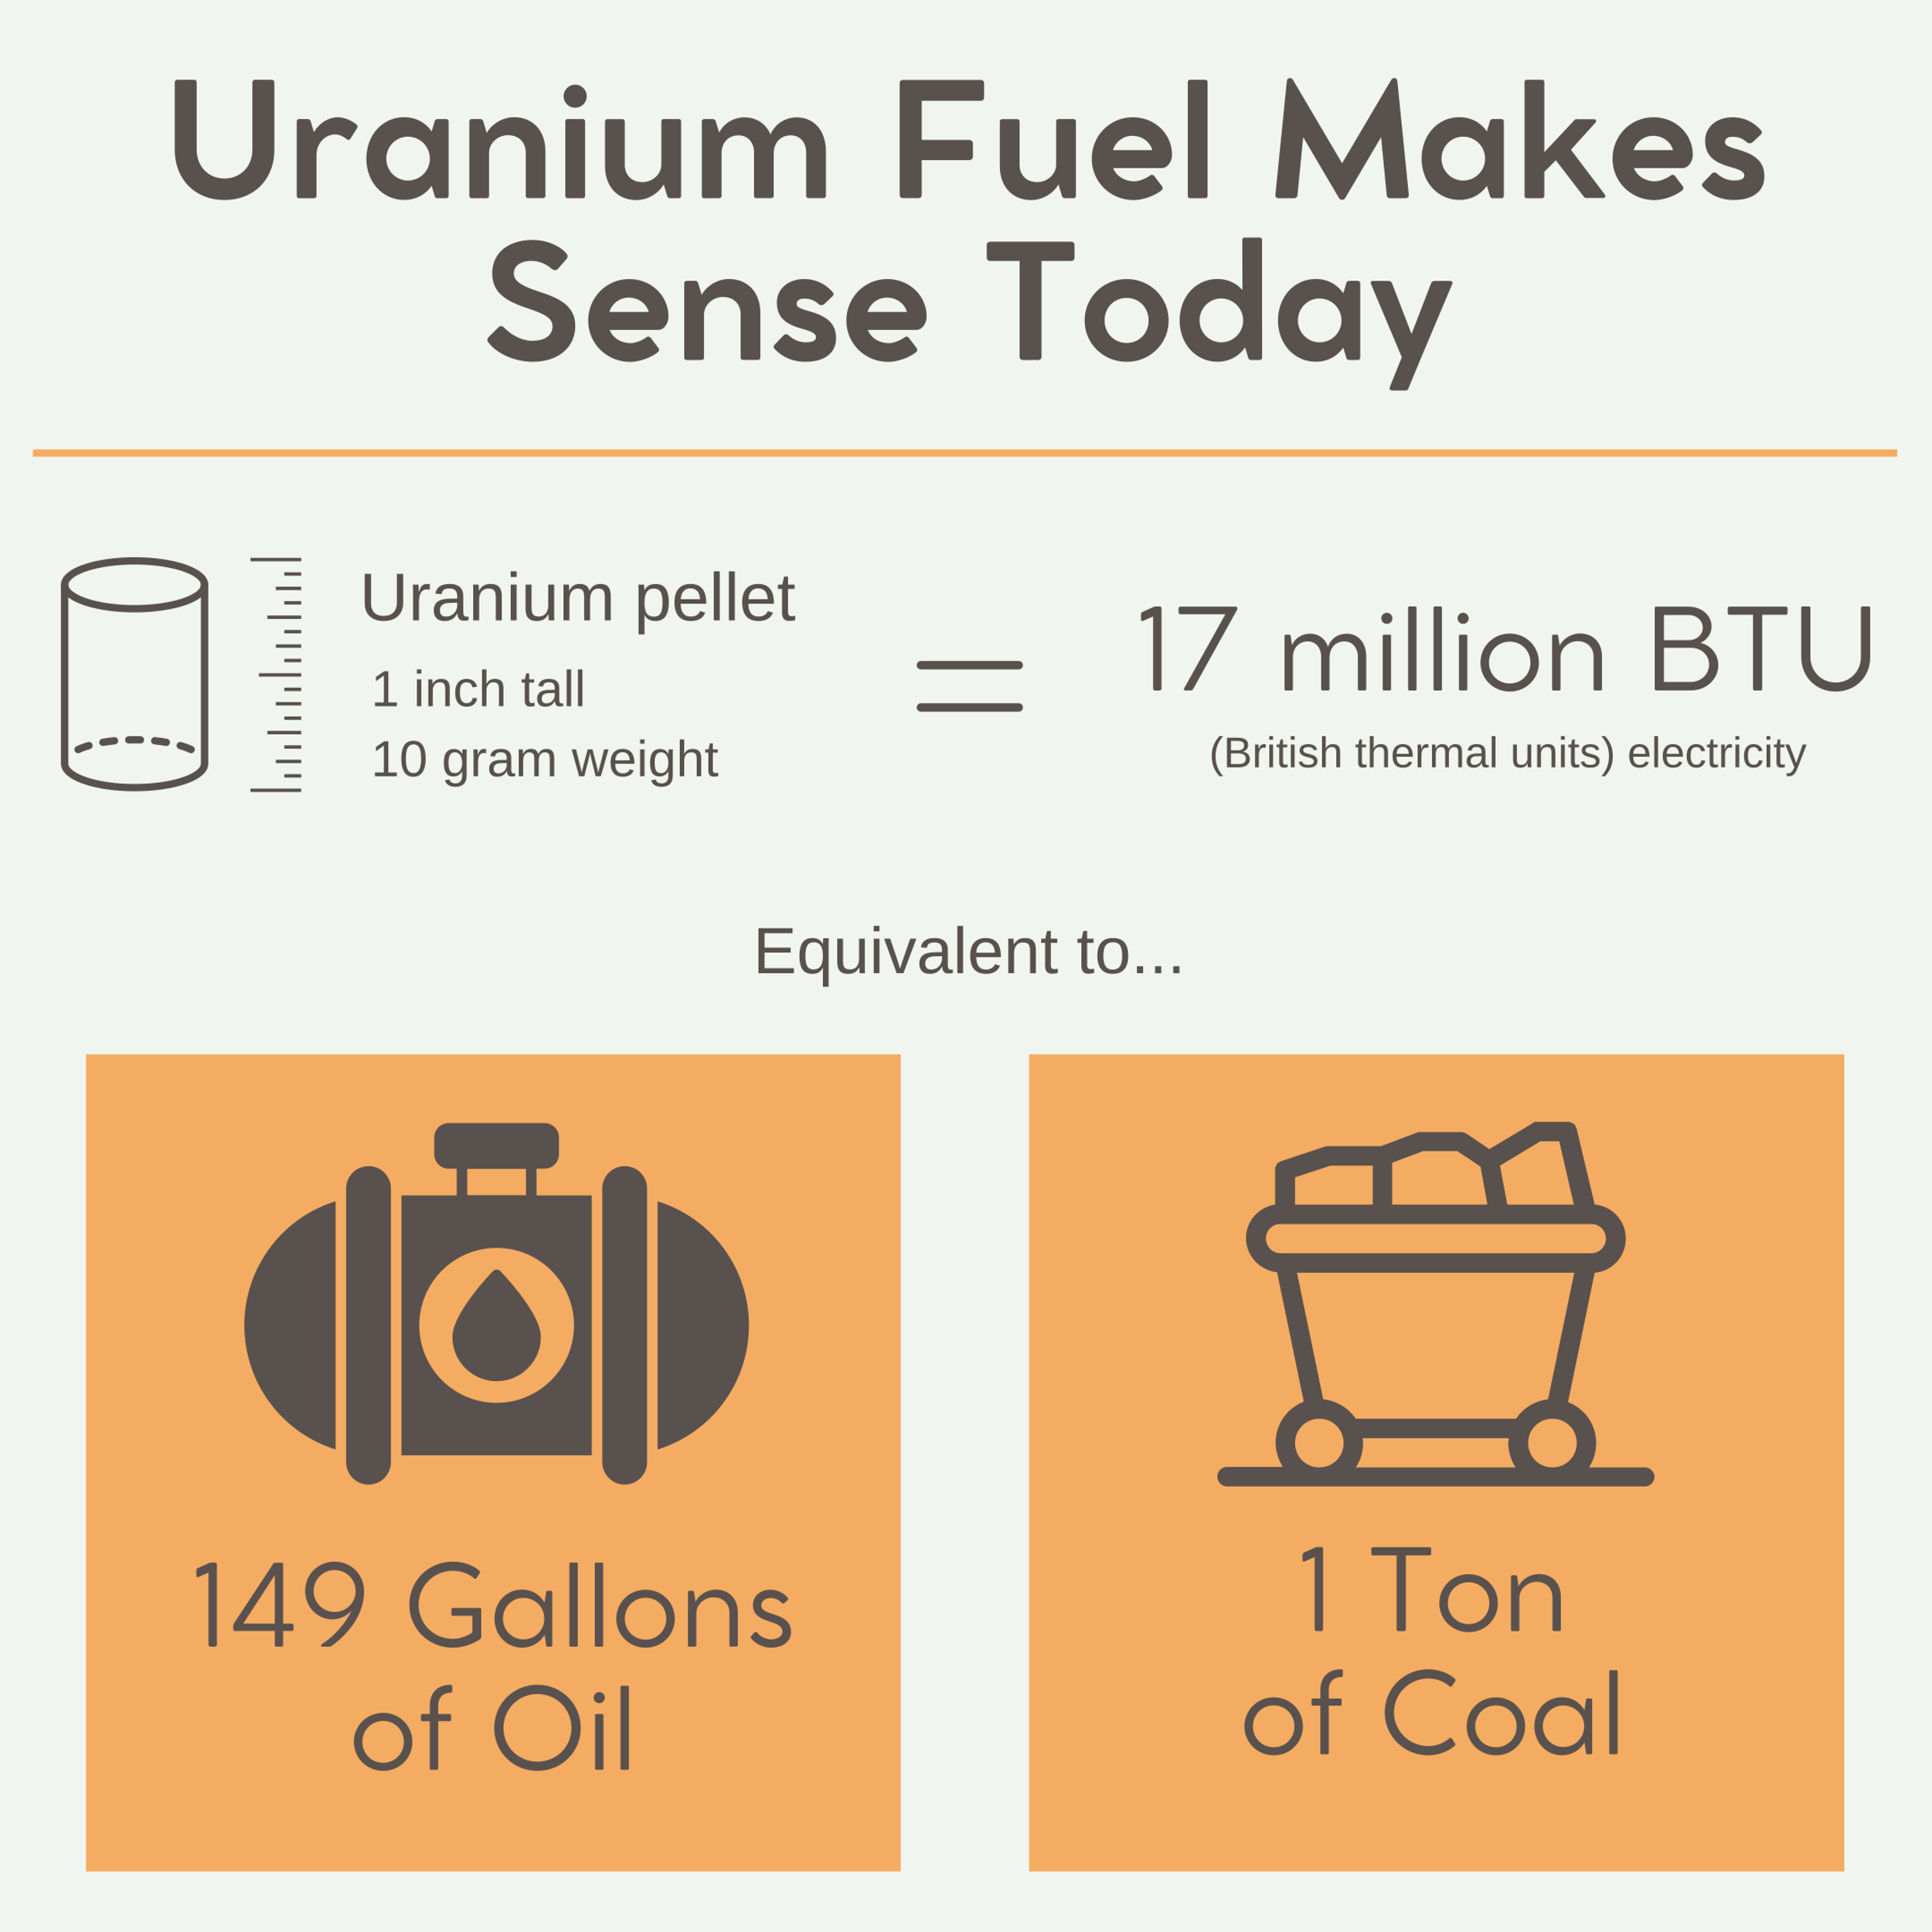 Graphic showing that a one-inch, 10-gram uranium pellet generates about 17 million british thermal units of electricity. That's equivalent to about 149 gallons of oil or one ton of coal.